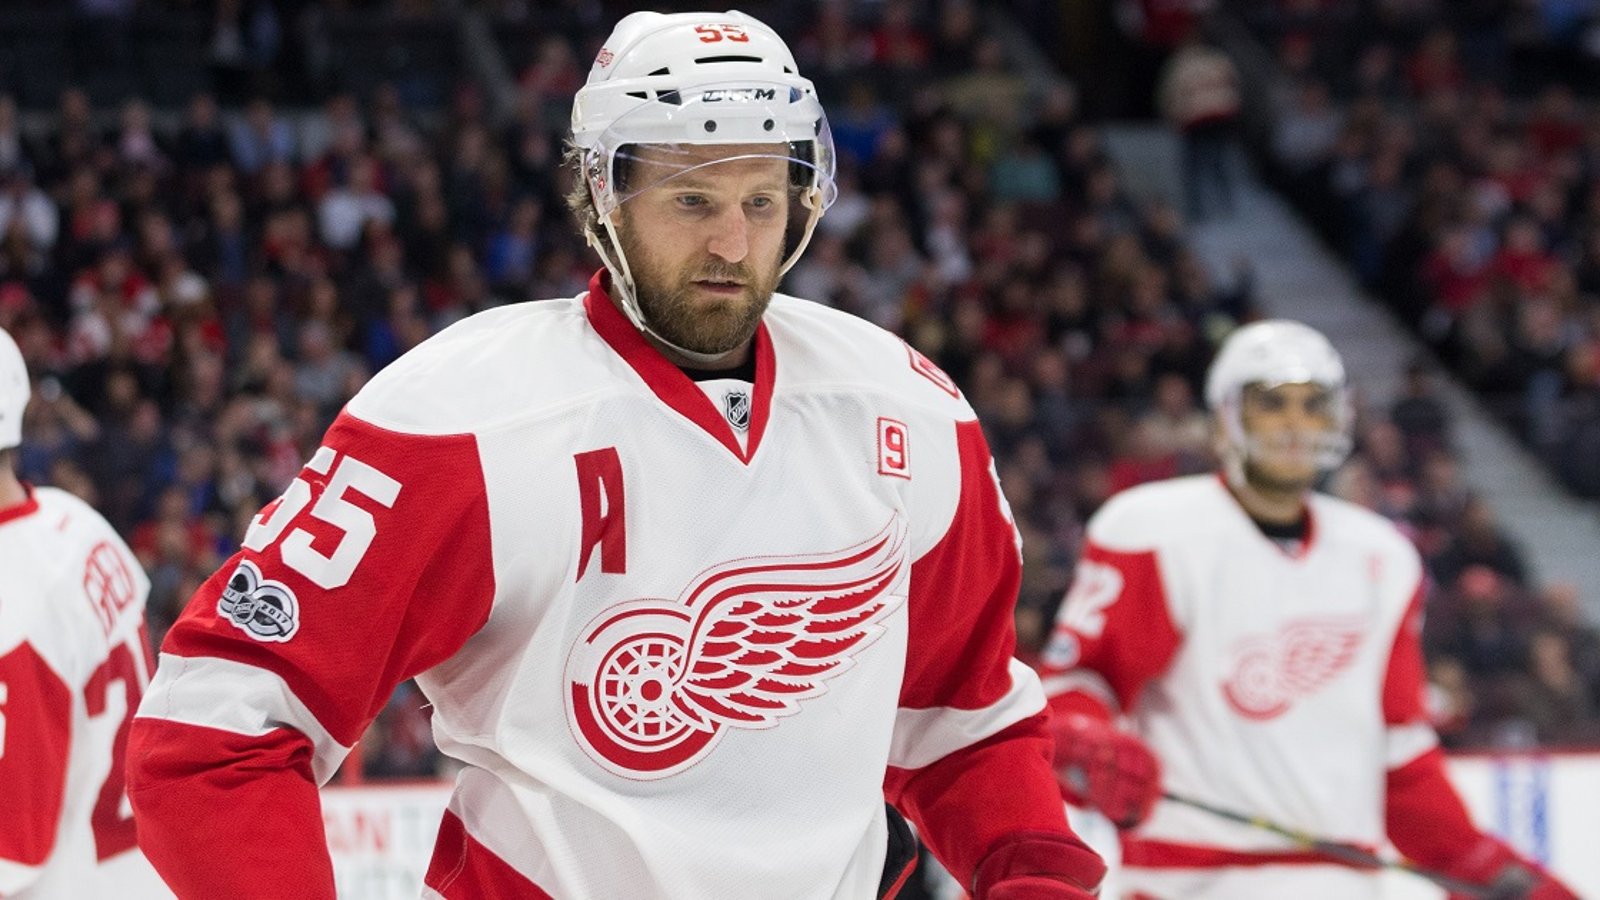 Steve Yzerman comments on the future of Nicklas Kronwall.